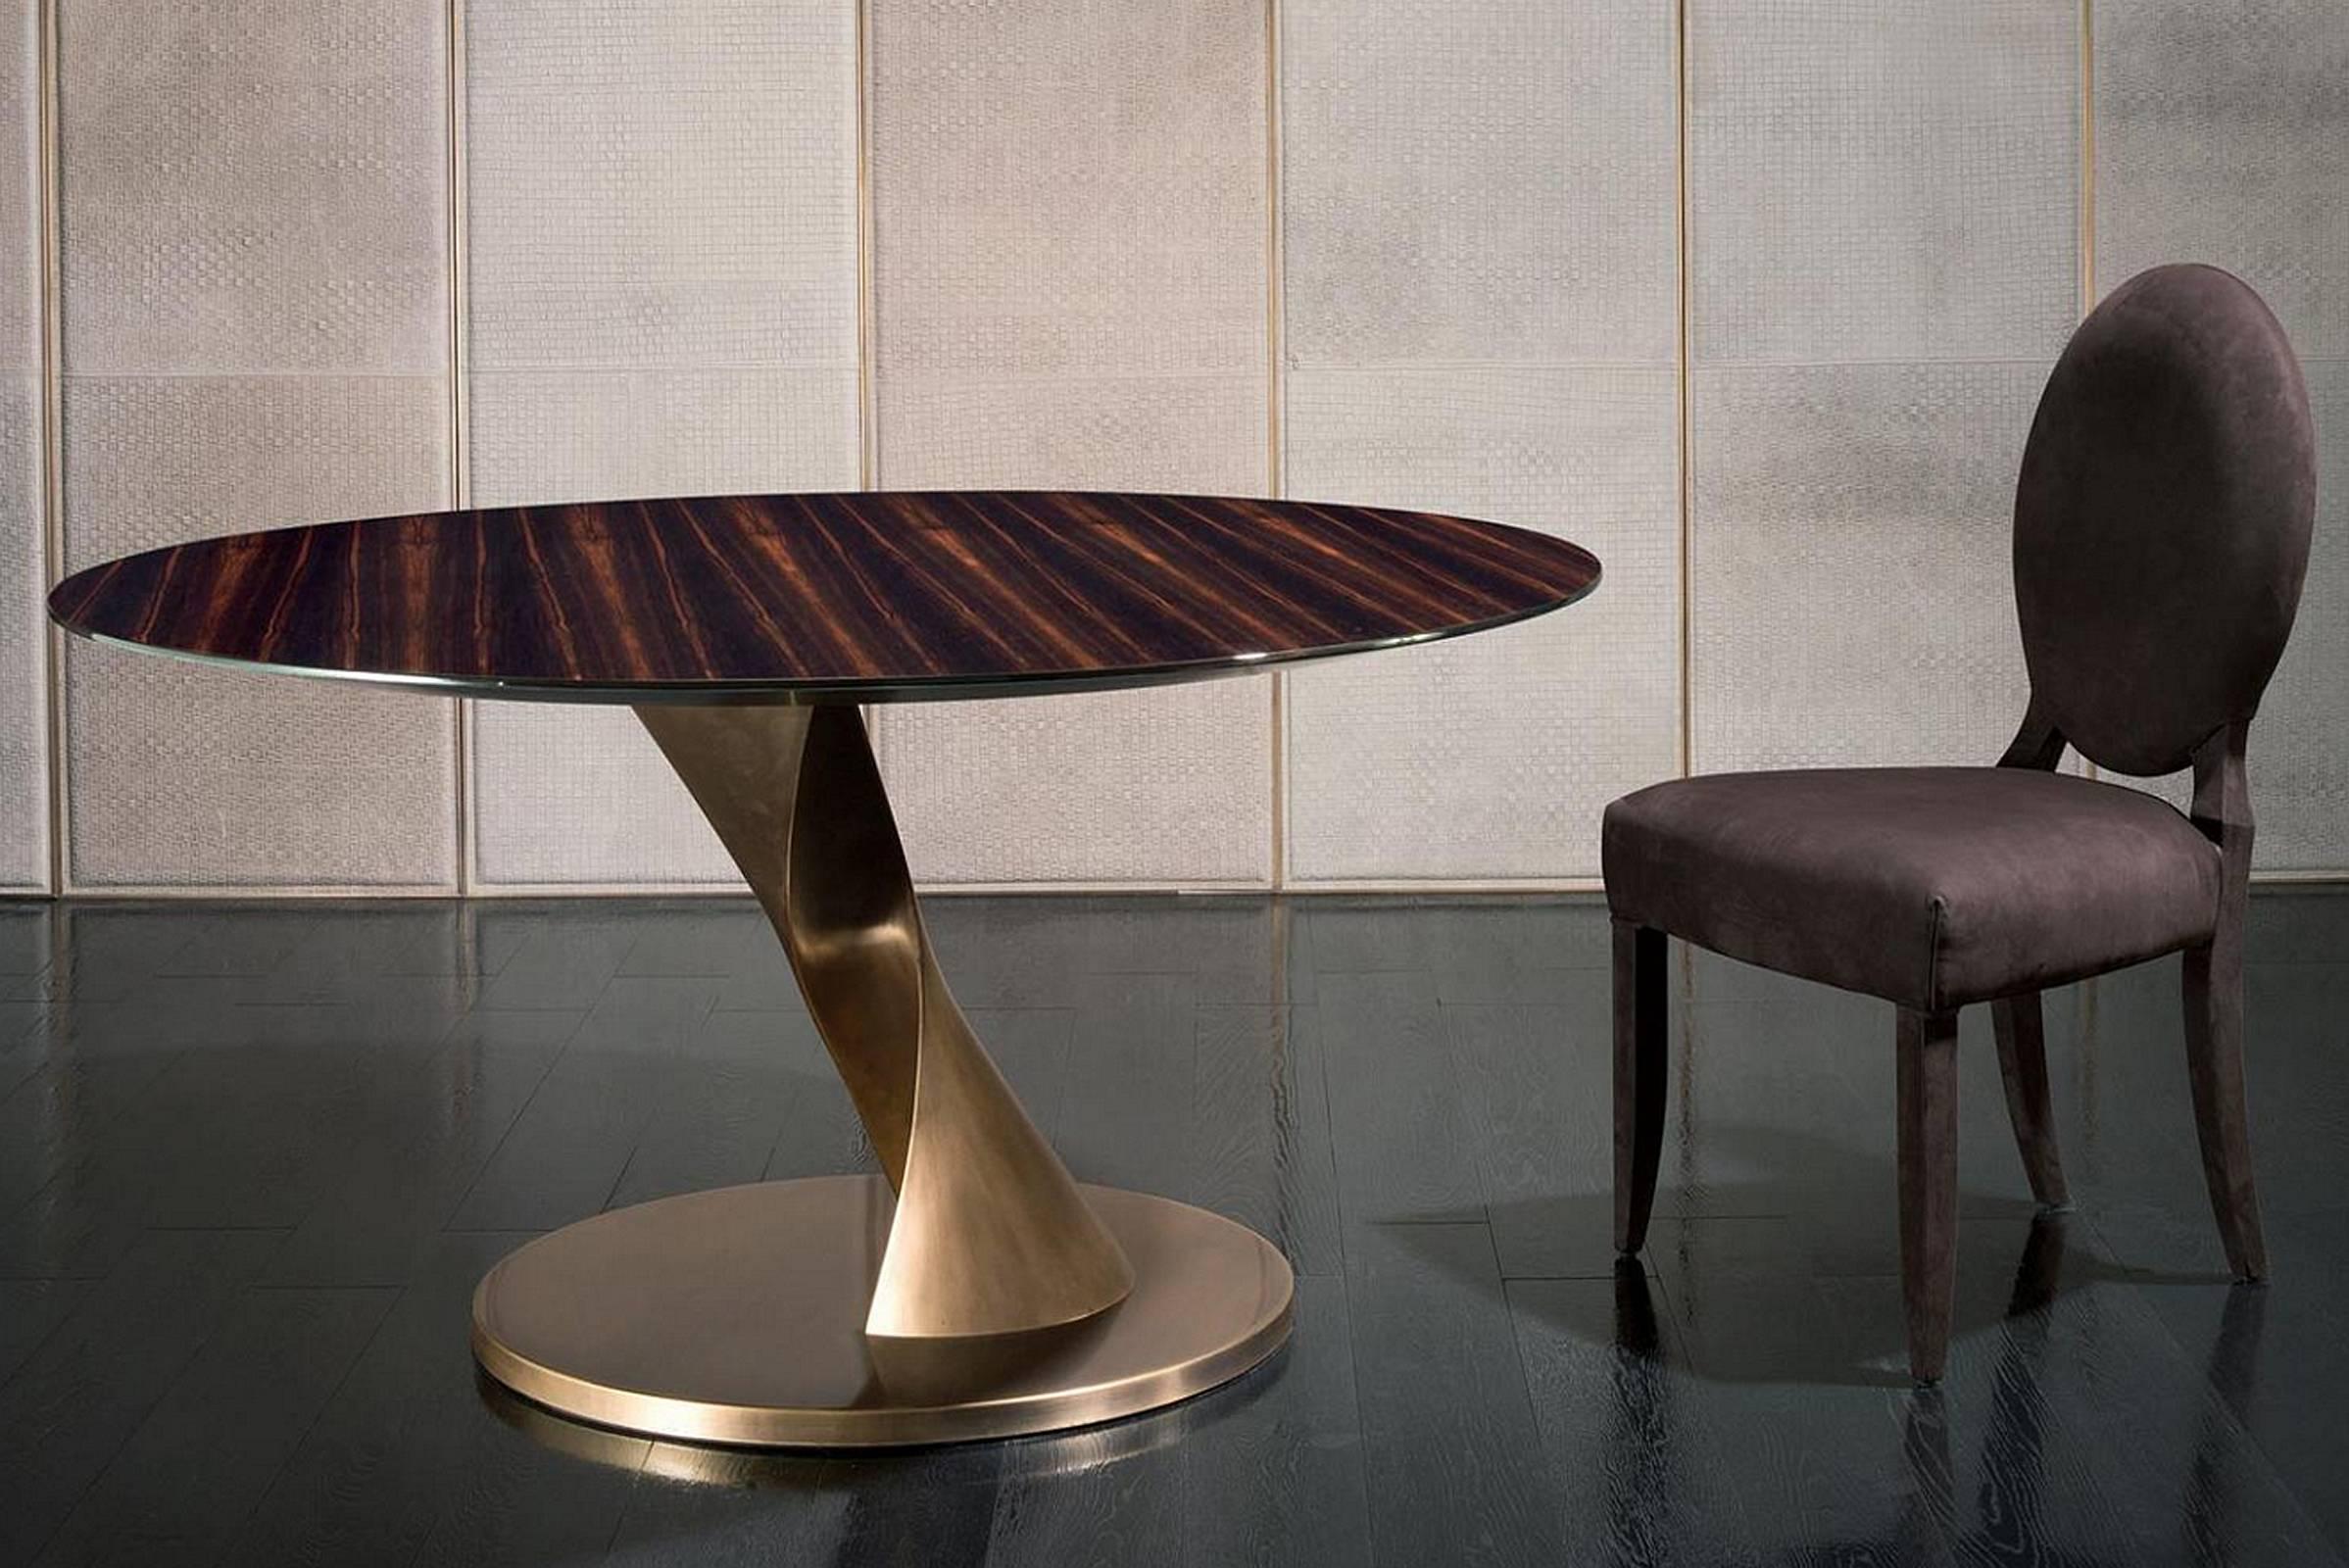 Round table Eva with polished bronze base
and solid ebony top. Also available with polished
aluminium and genuine leather.
Measures: Ø150 x H 75cm, price: 20900,00€.
Ø170cm, price: 25500,00€.
Option protection glass top in
6mm for Ø150cm, price: